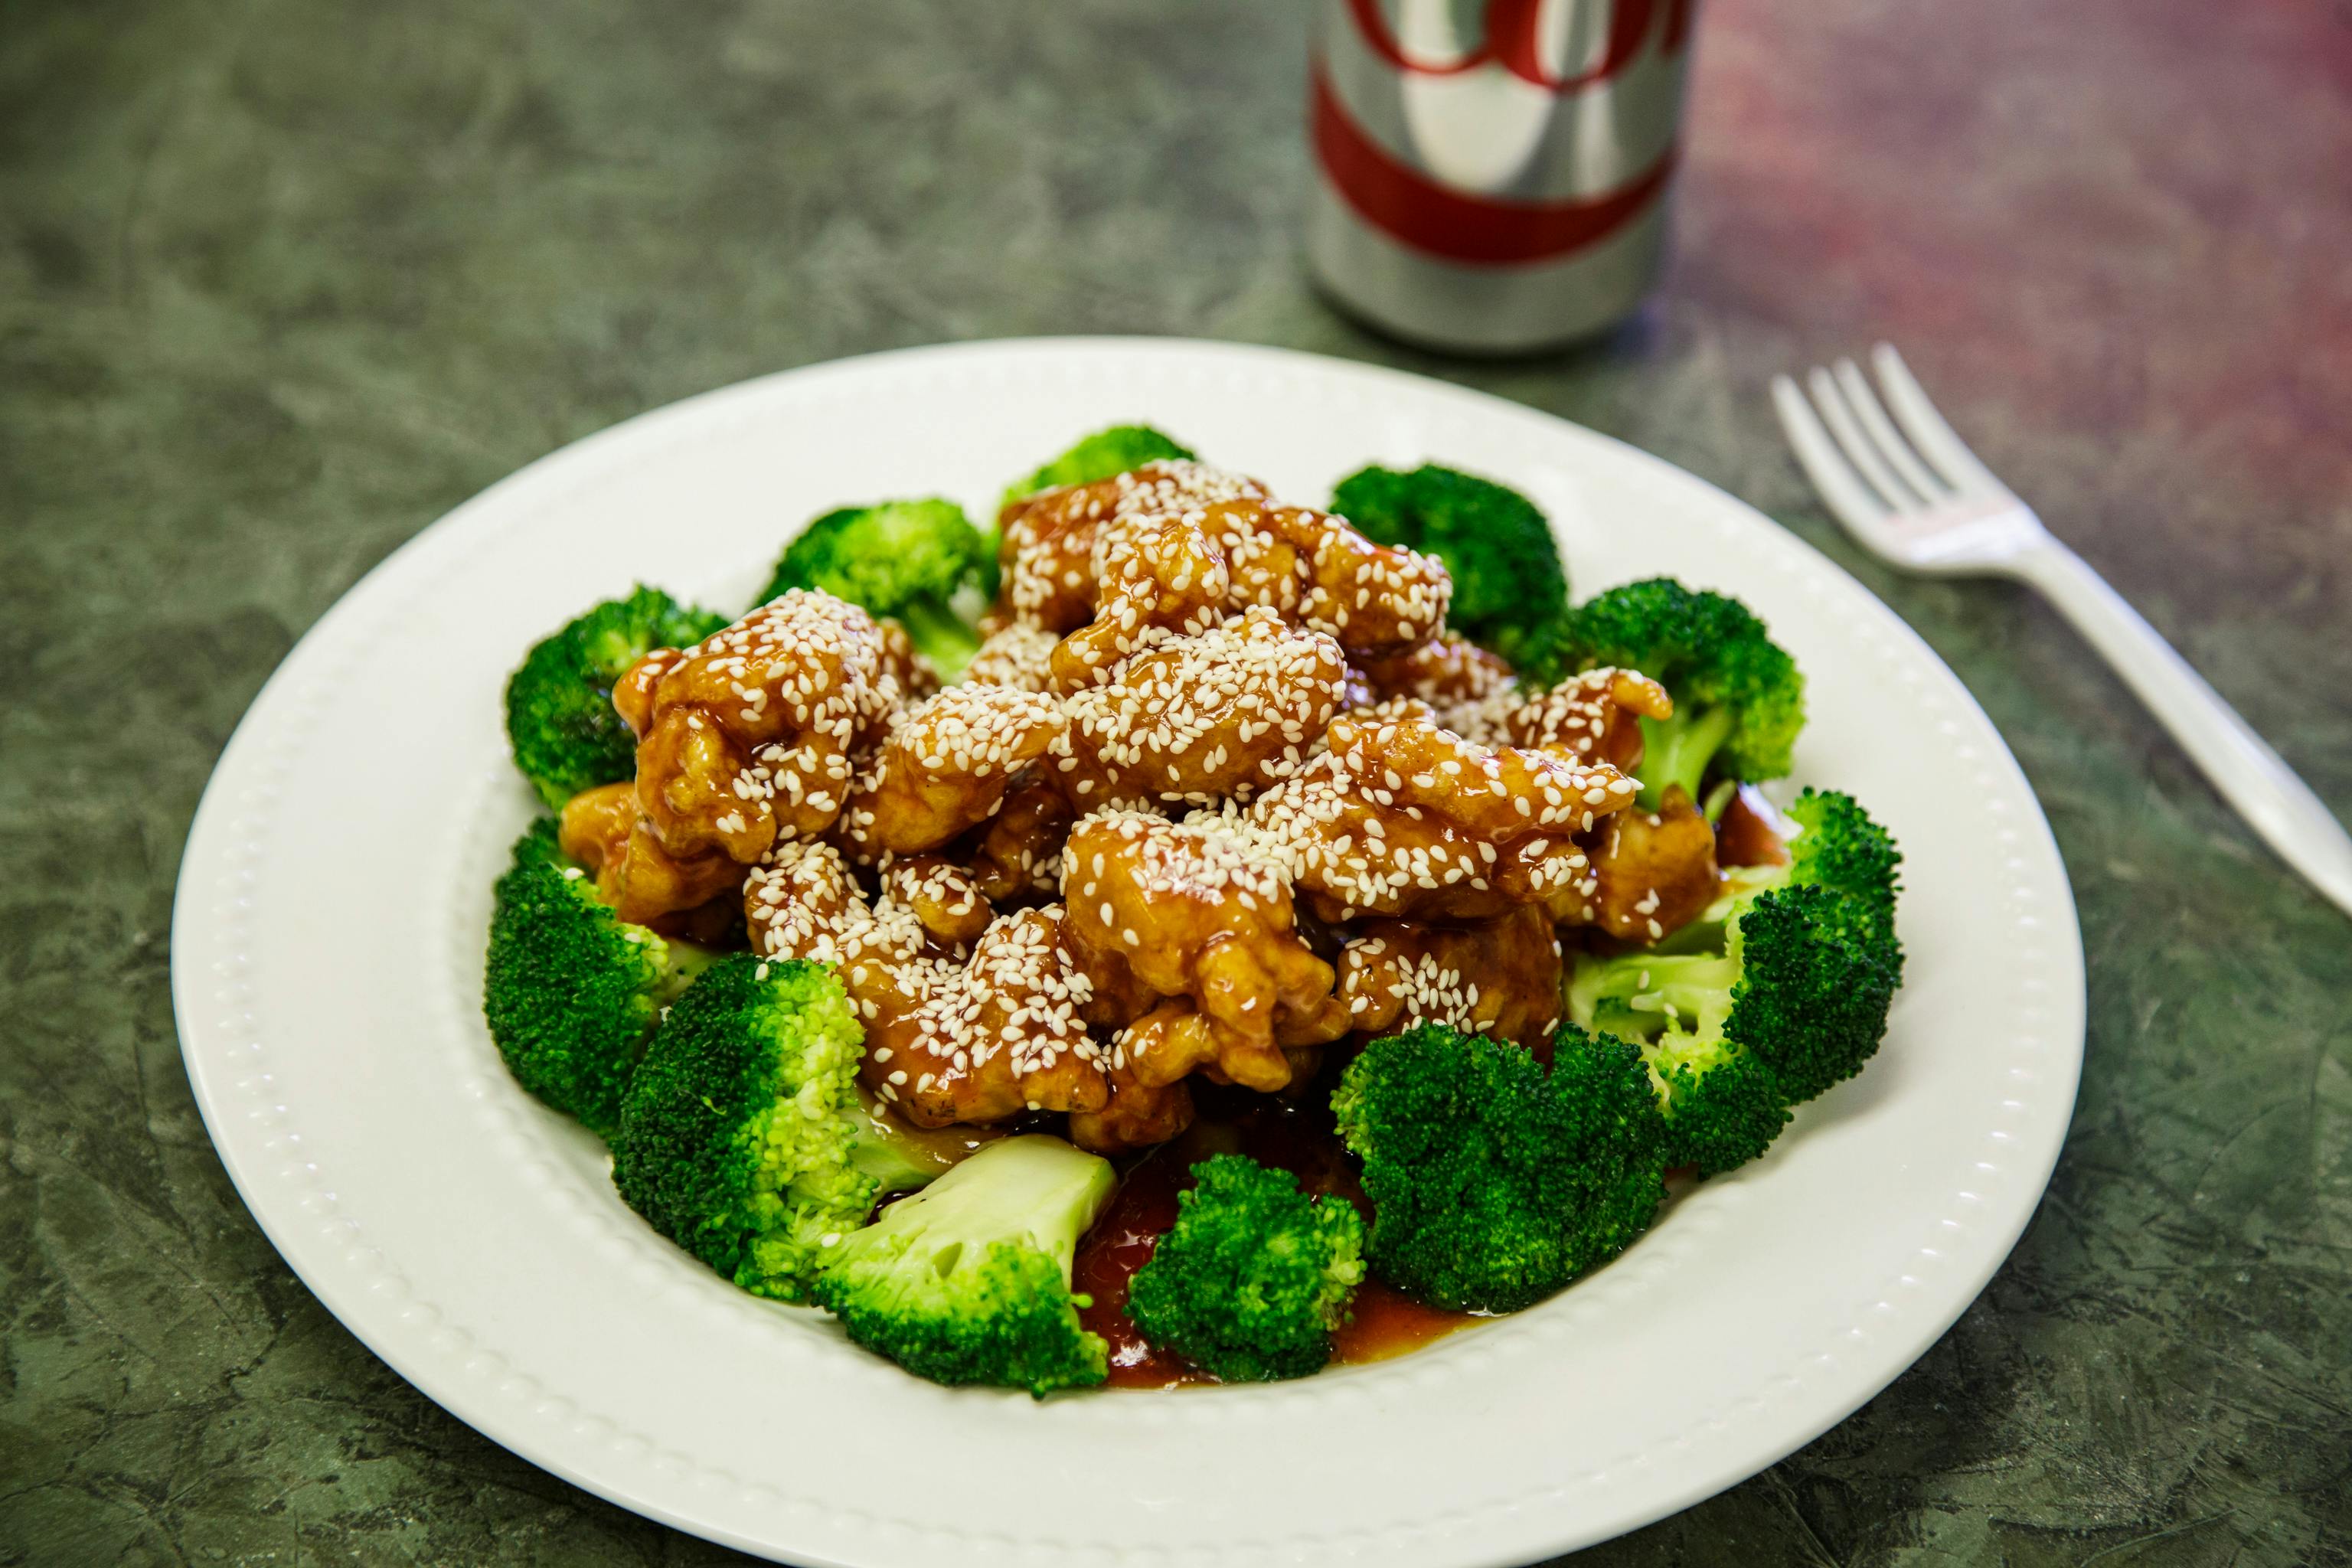 S11. Sesame Chicken from China Wok in Madison, WI